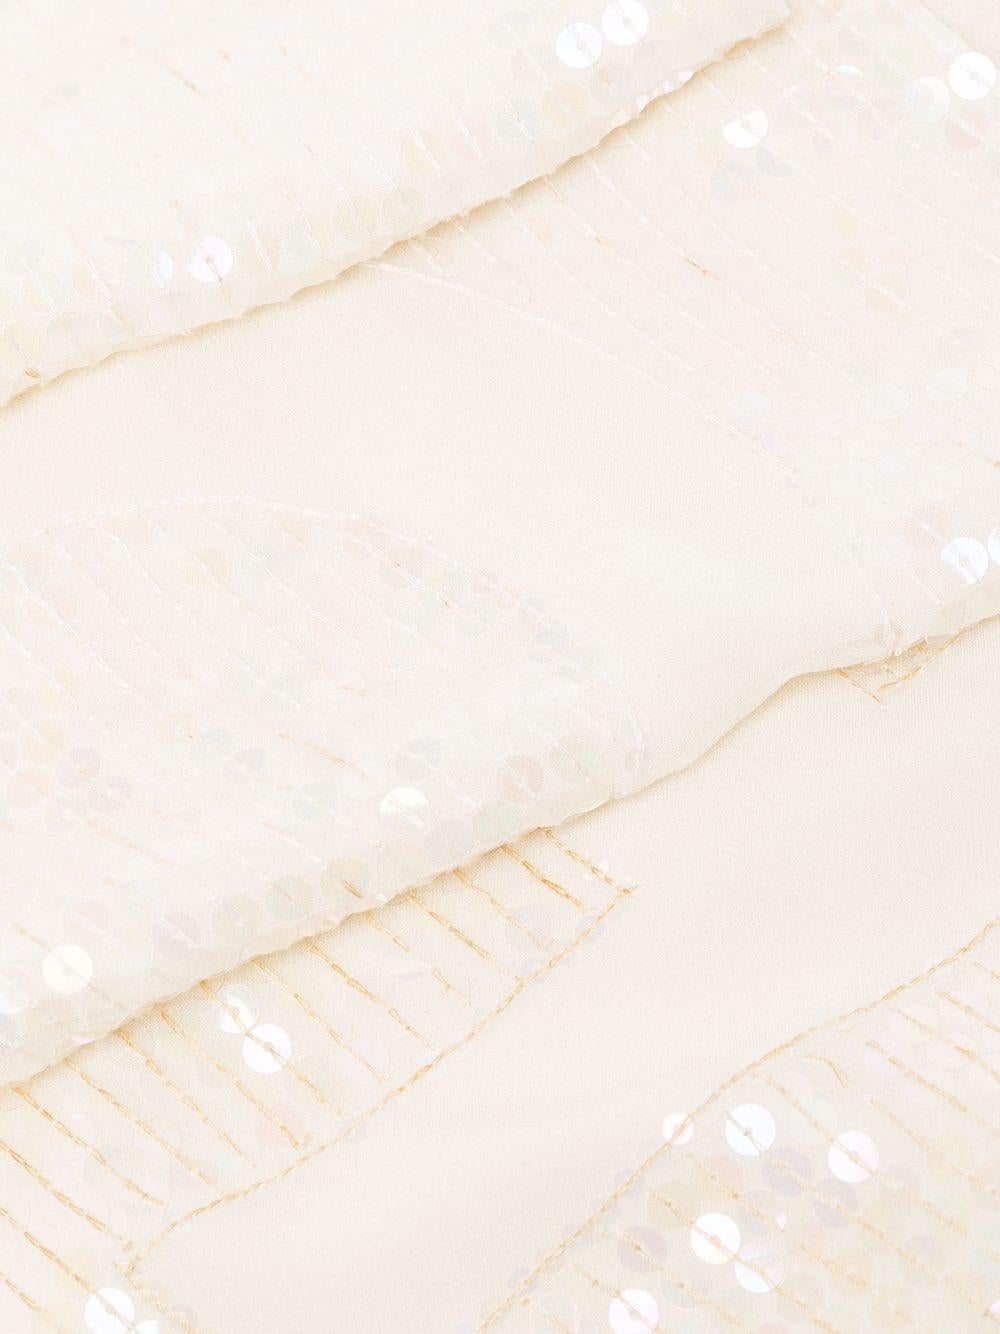 This chic pre-owned Chanel sequin scarf was crafted in France and is composed of the purest silk. Embellished with sequins in the Chanel Maison's classic CC interlocking logo, this pearl white scarf is the perfect neutral tone to style with any